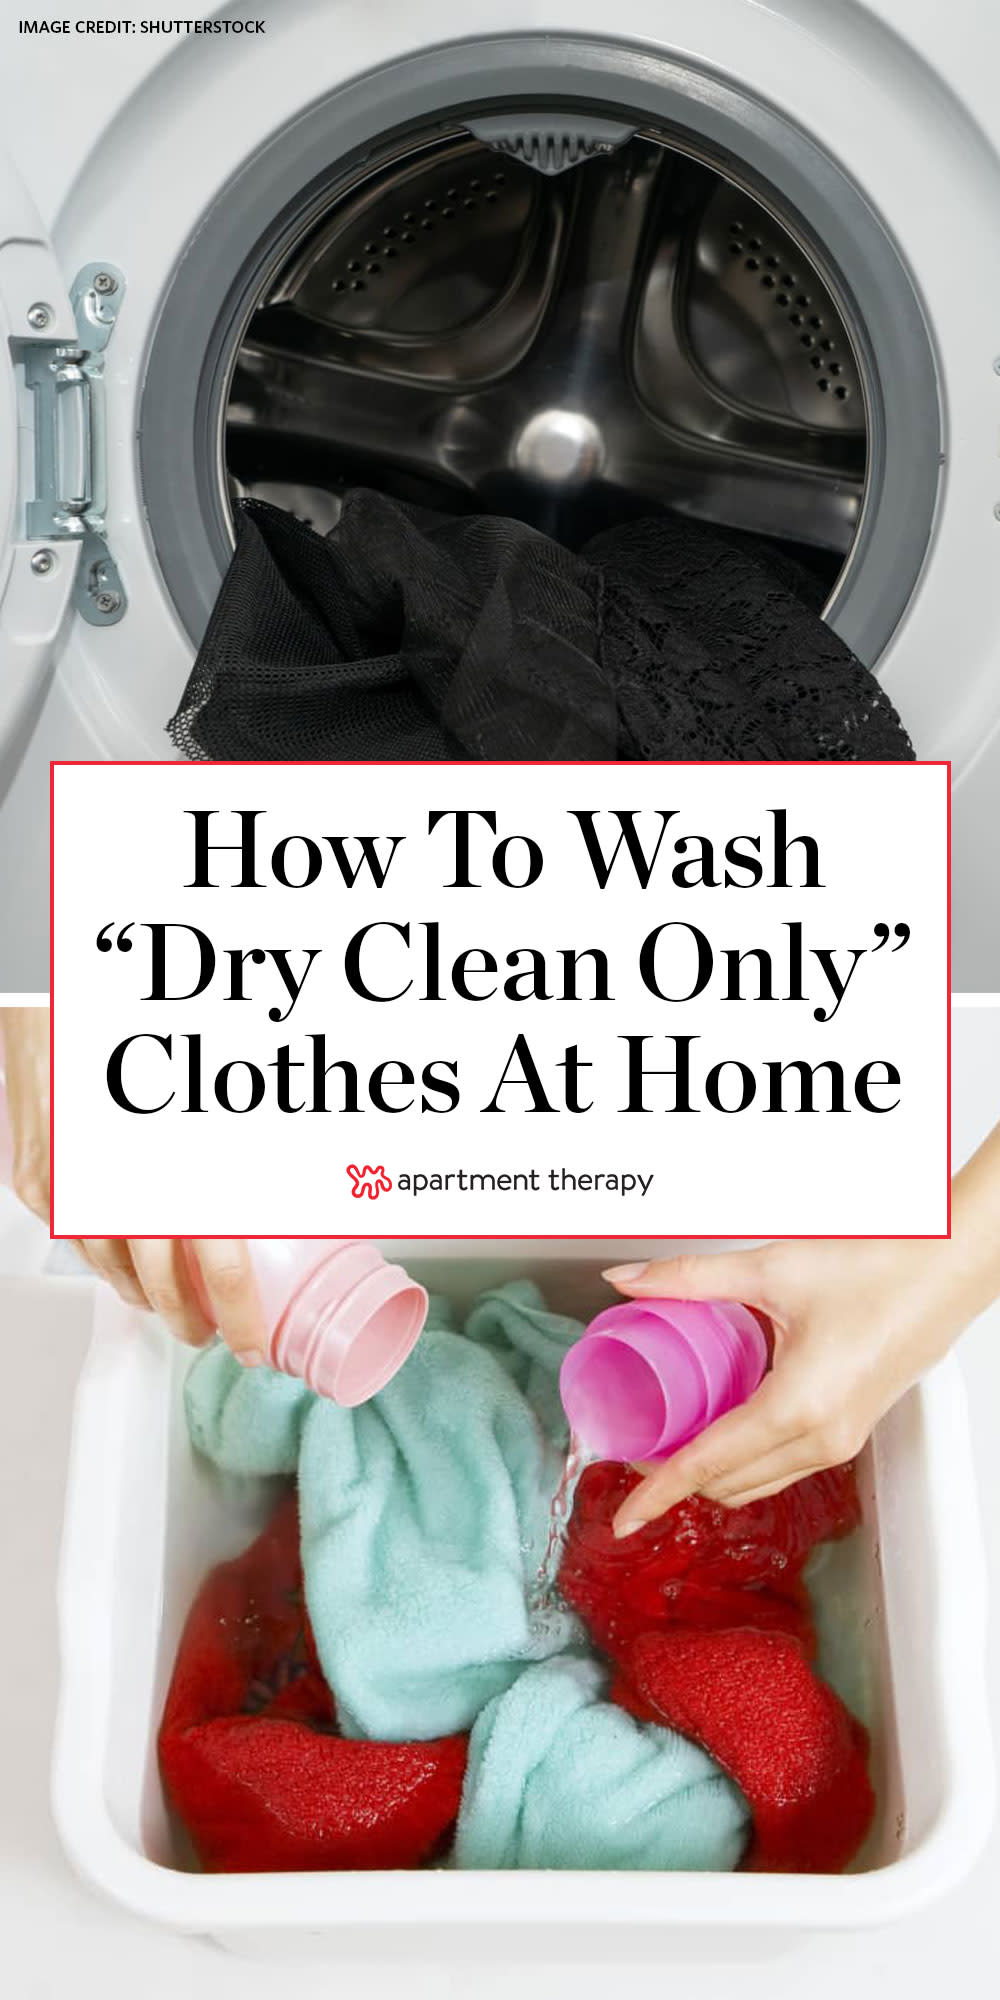 This at-home dry cleaner kit saves you time and money